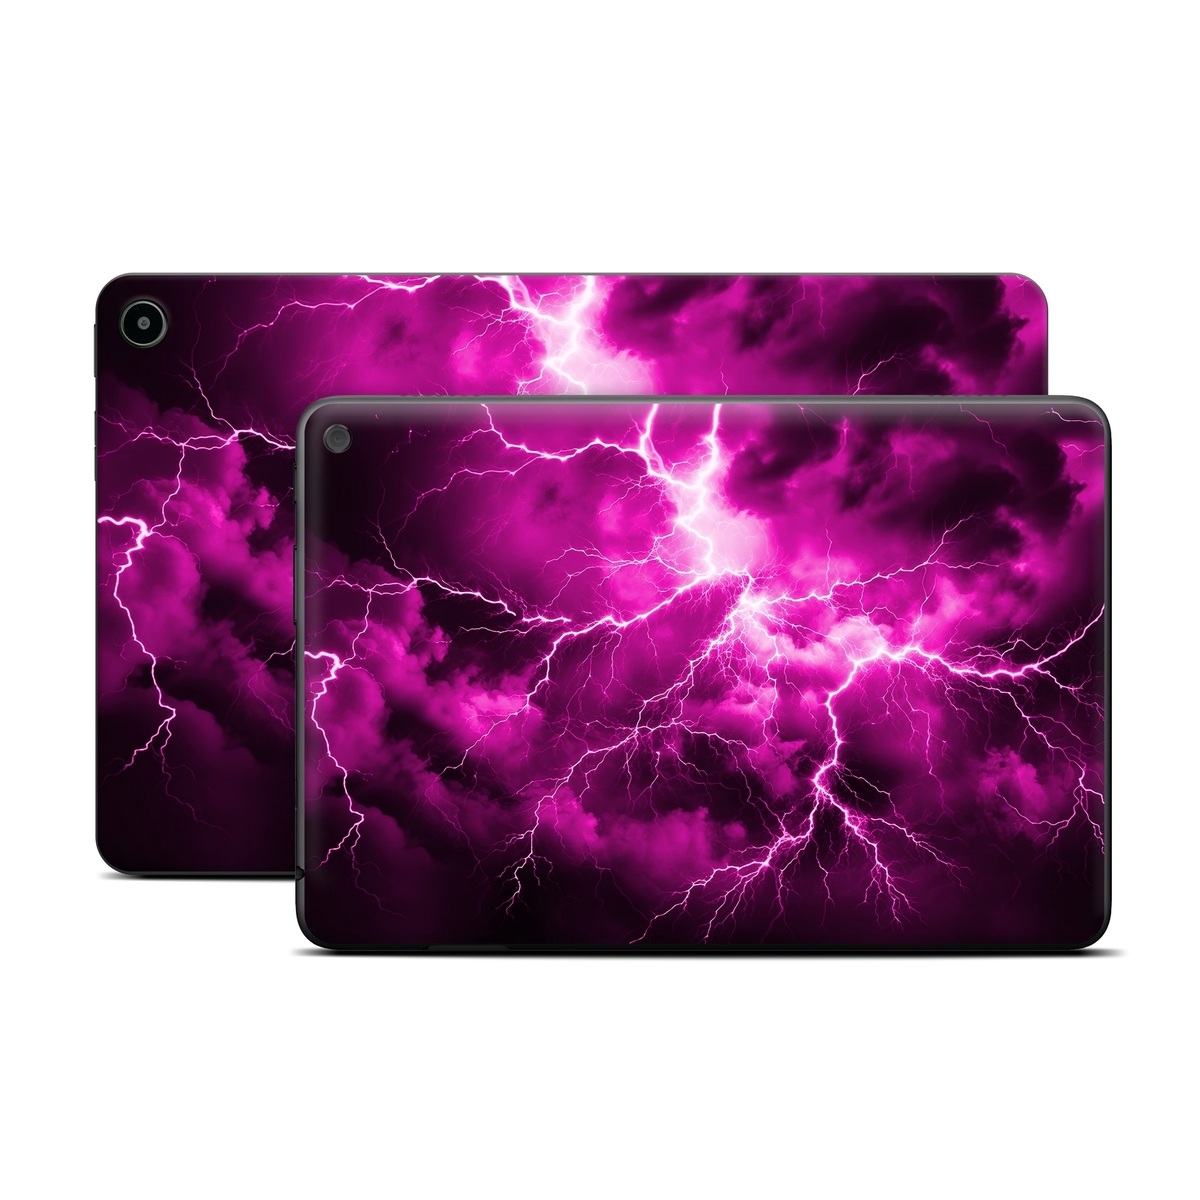 Amazon Fire Tablet Series Skin Skin design of Sky, Thunder, Lightning, Thunderstorm, Atmosphere, White, Purple, Light, Nature, Water, with black, pink colors